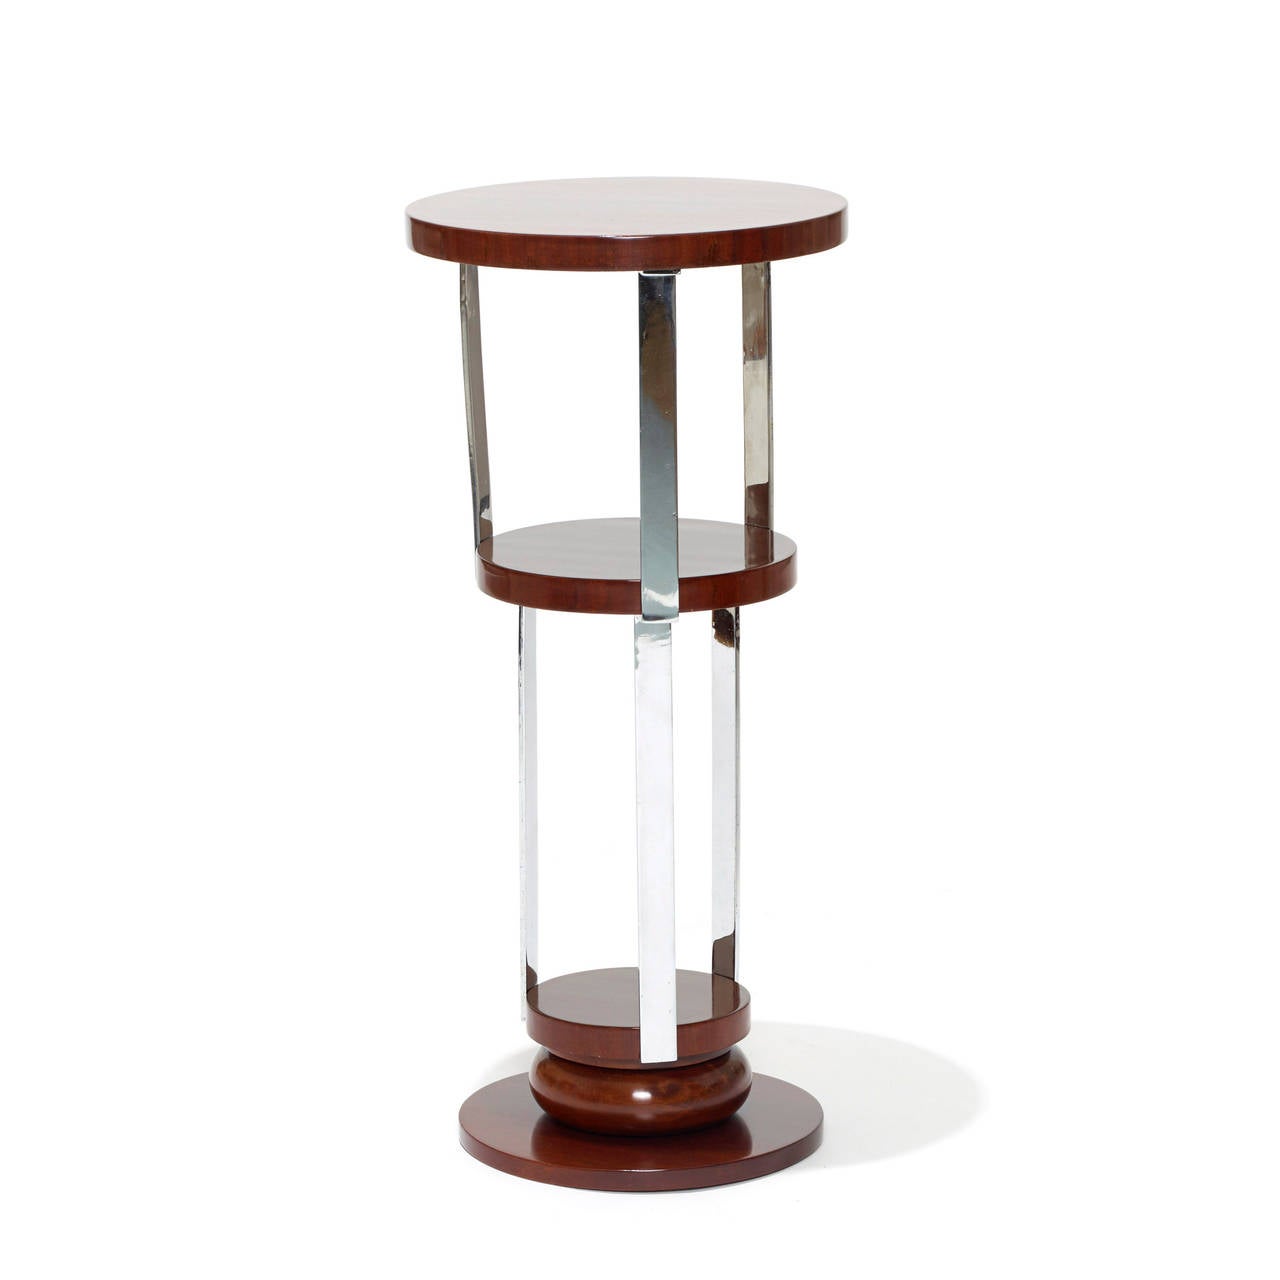 Round guéridon or pedestal by Jacques Adnet (1901-1984) with central shelf and sculptural base in rosewood and chromed metal, France, 1920s.